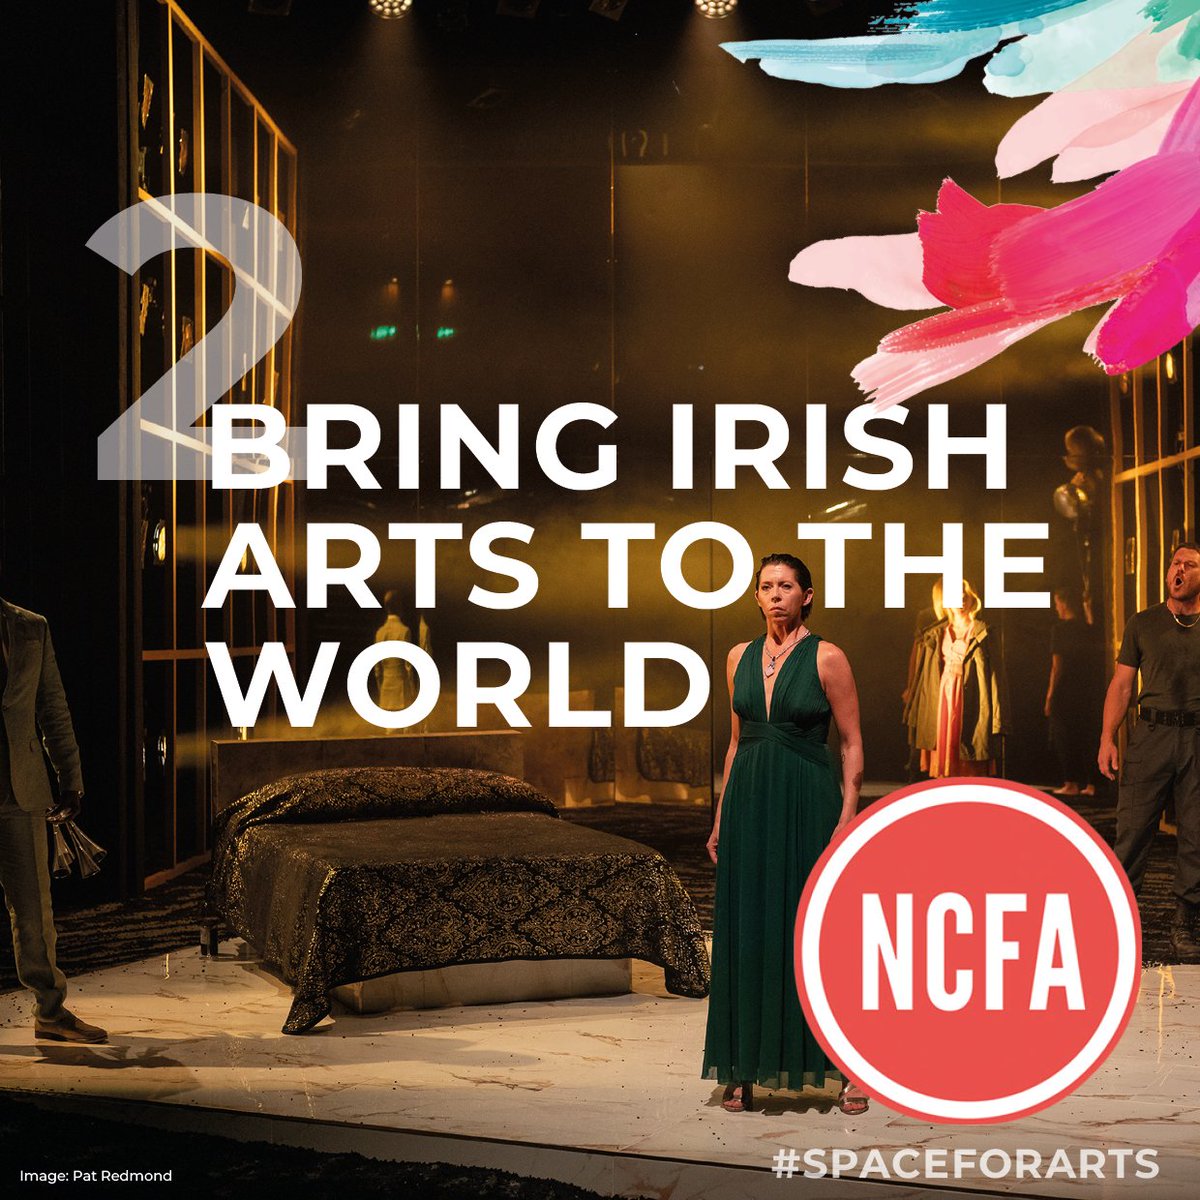 ISACS fully supports the @Campaign4Arts & asks for increased investment for @artscouncil_ie, @culture_ireland, @creativeirl, and also including the #SharedIsland initiative - vital for us being a 32-county organisation and for artistic cross-border collaborations.

#SpaceforArts